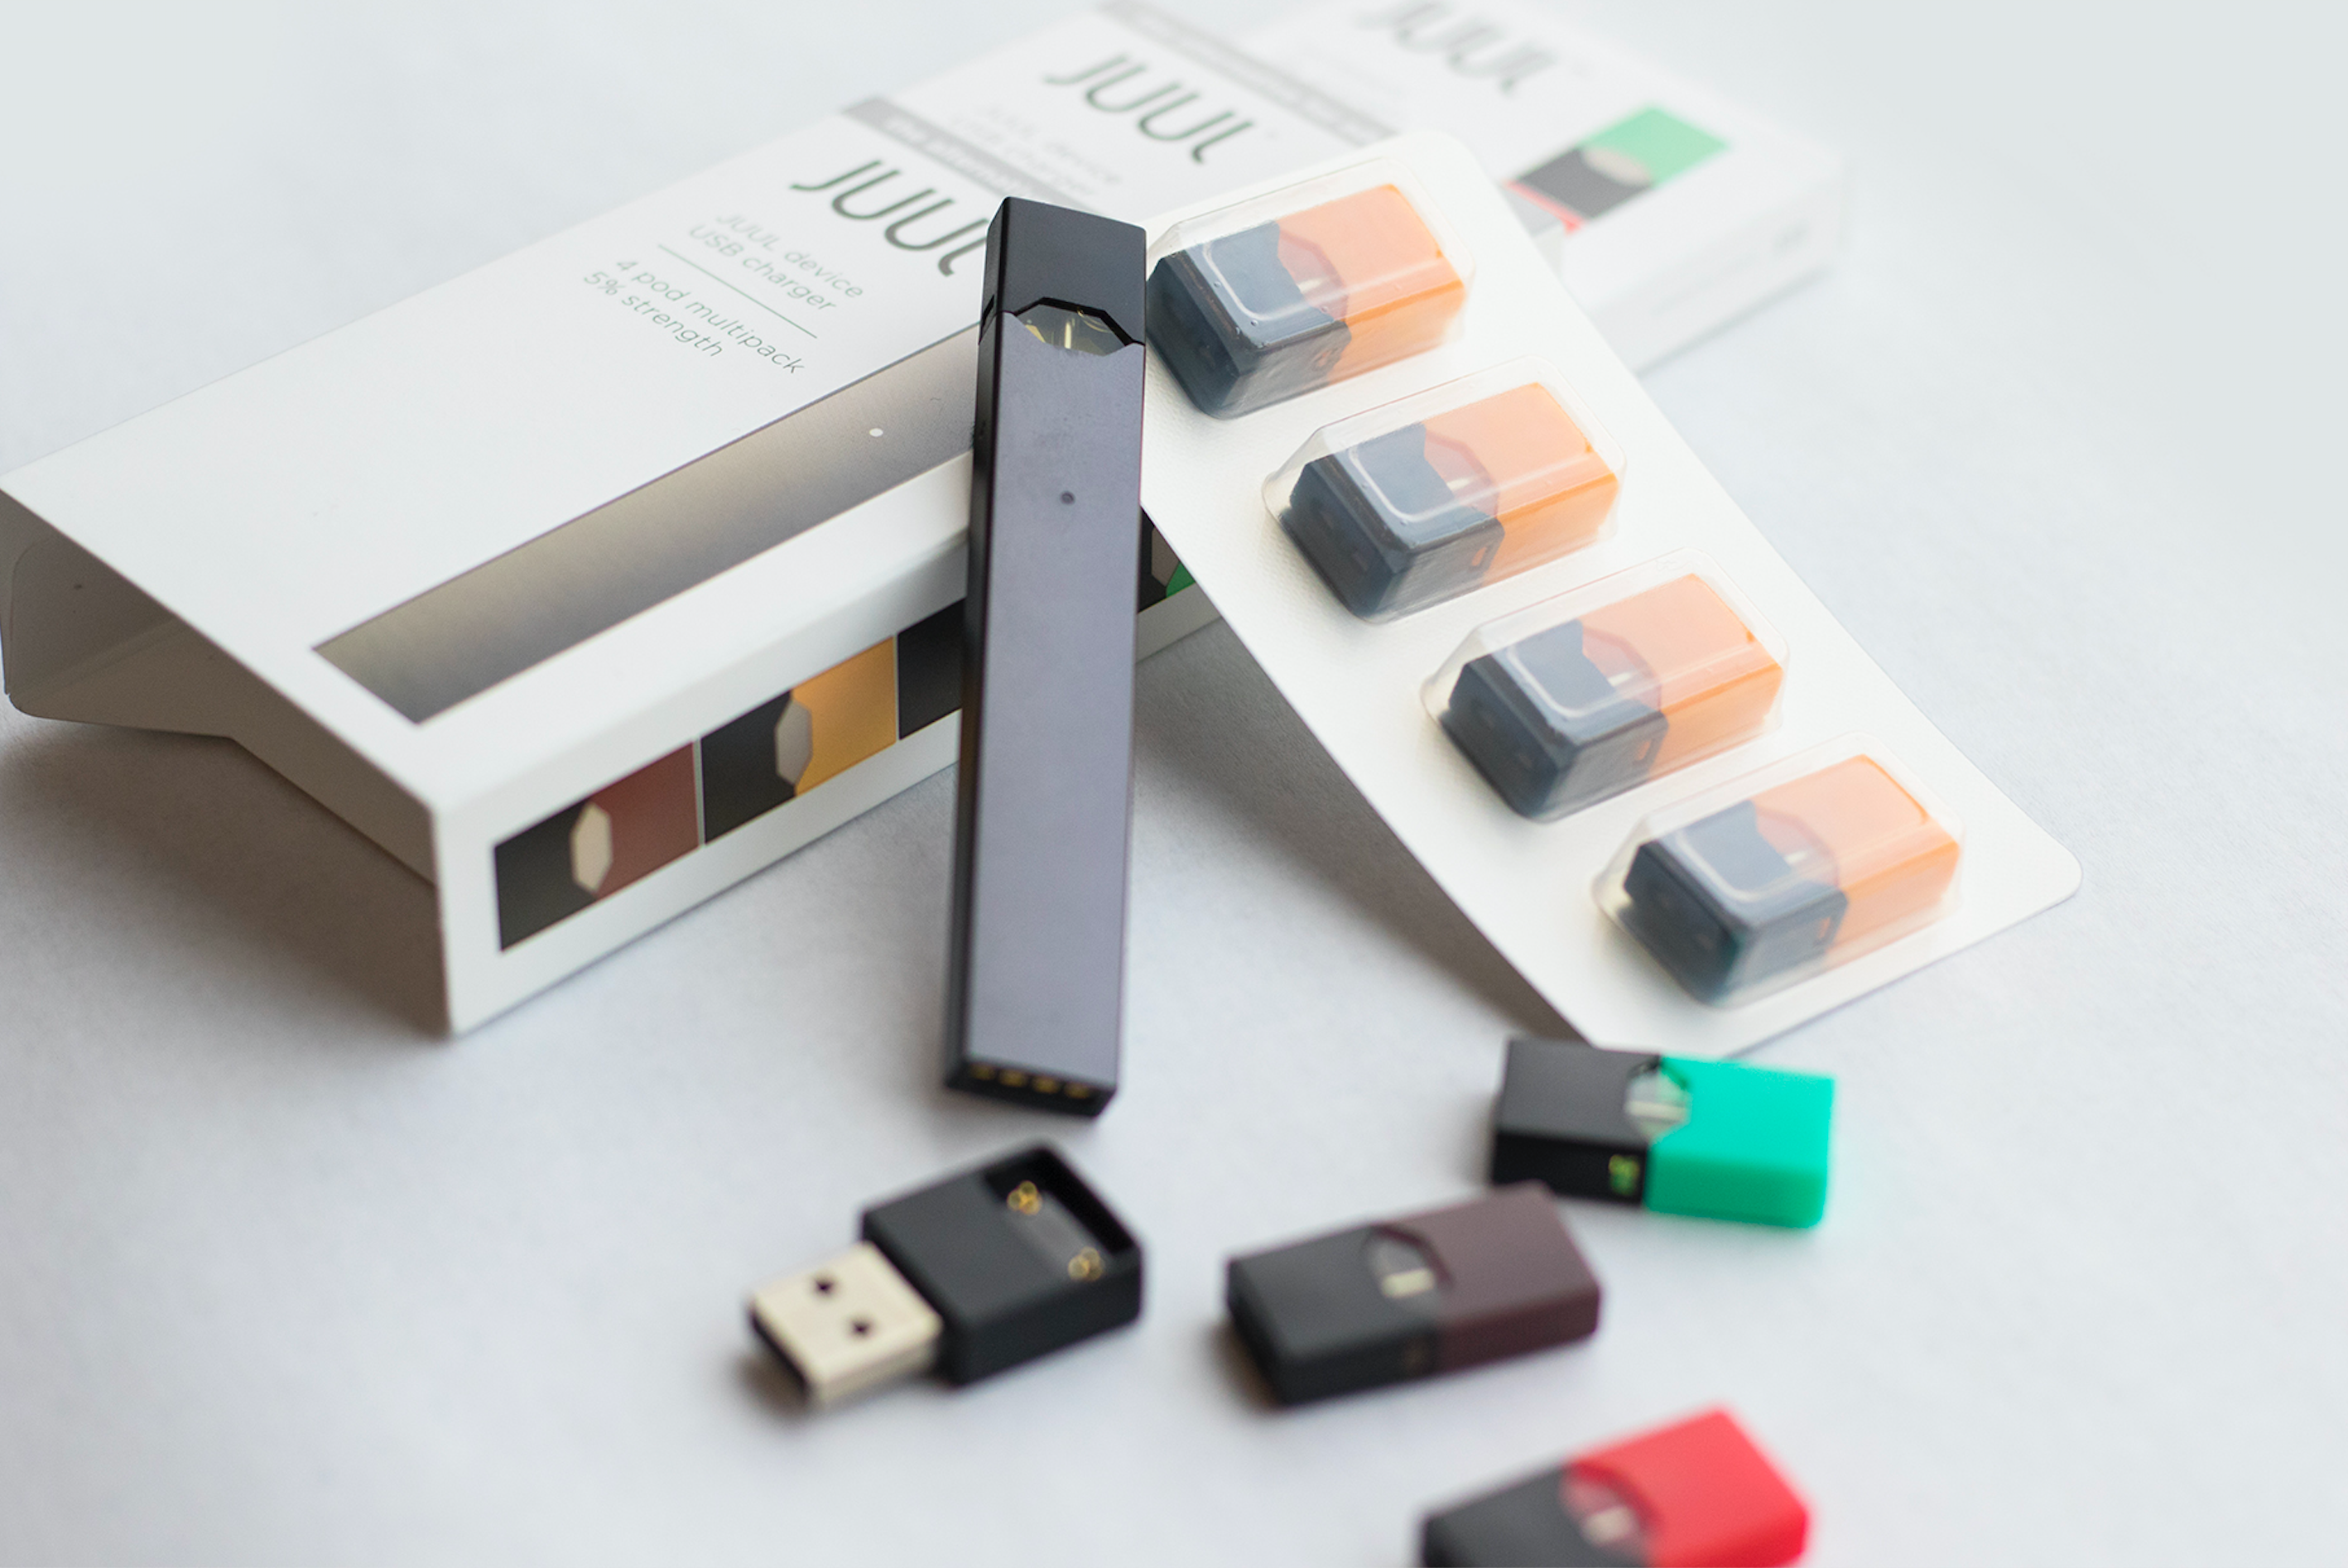 how to order a new free juul using serial code